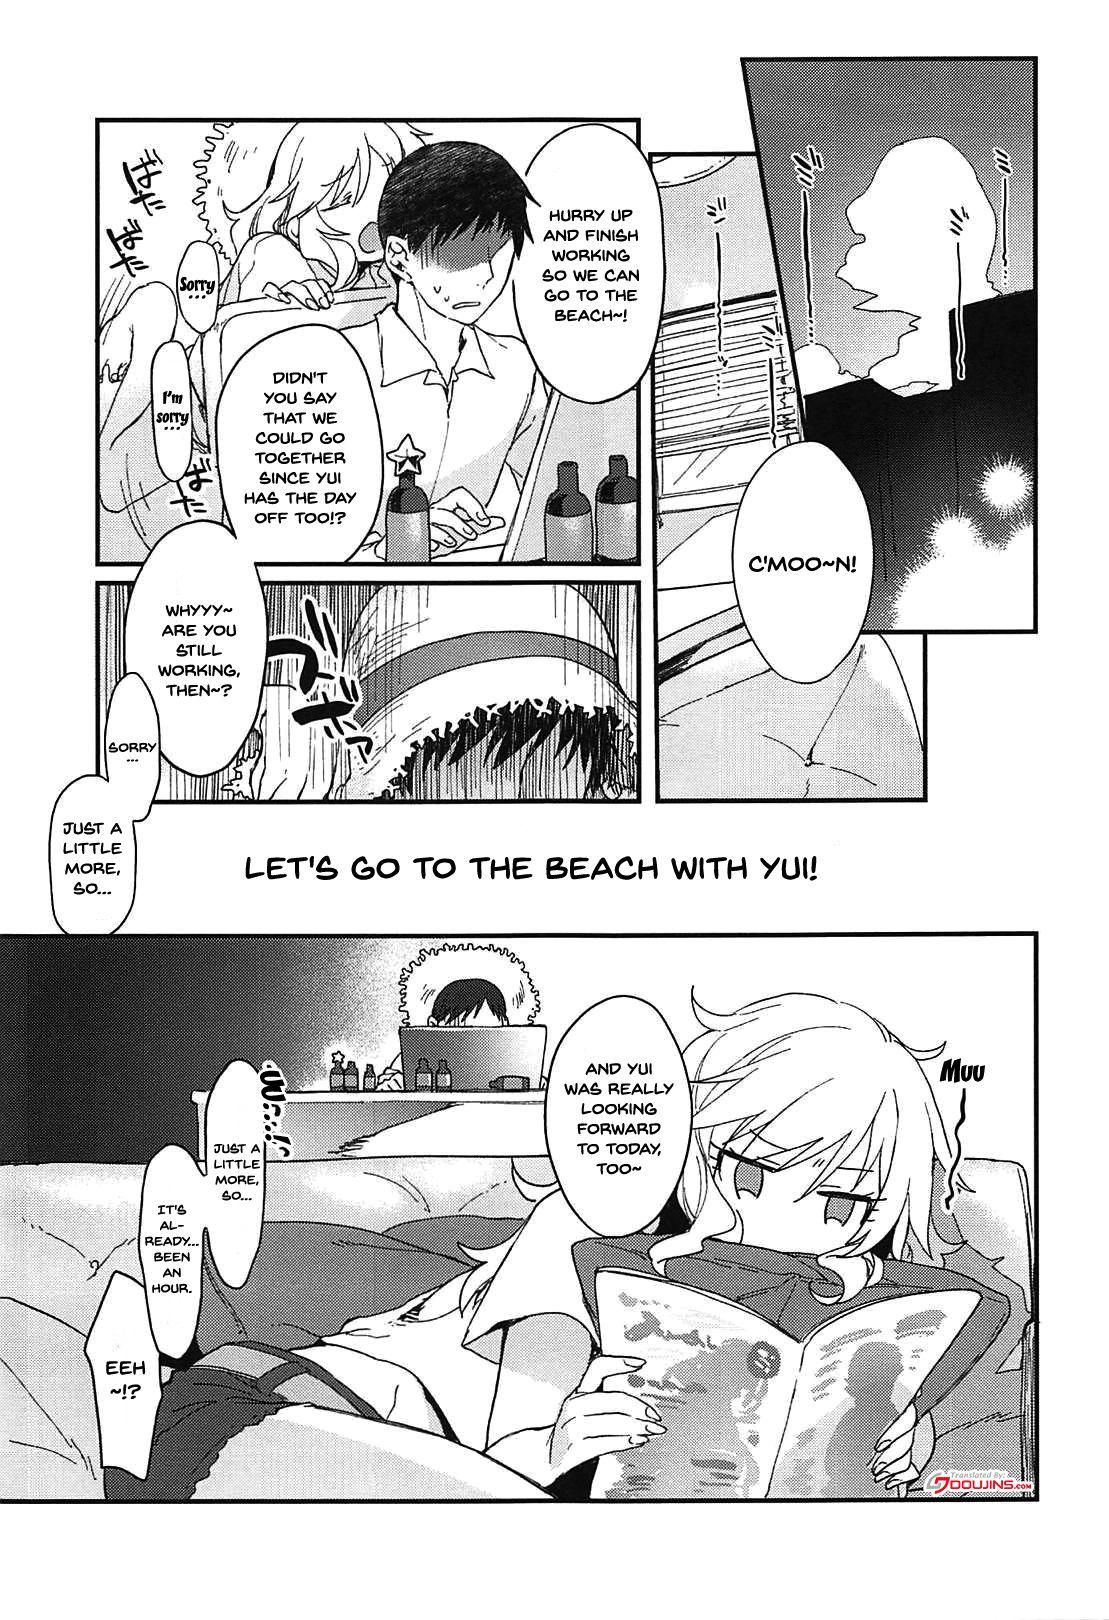 Spy Cam Yui to Umi Iko! | Going To The Beach With Yui! - The idolmaster Goth - Page 2